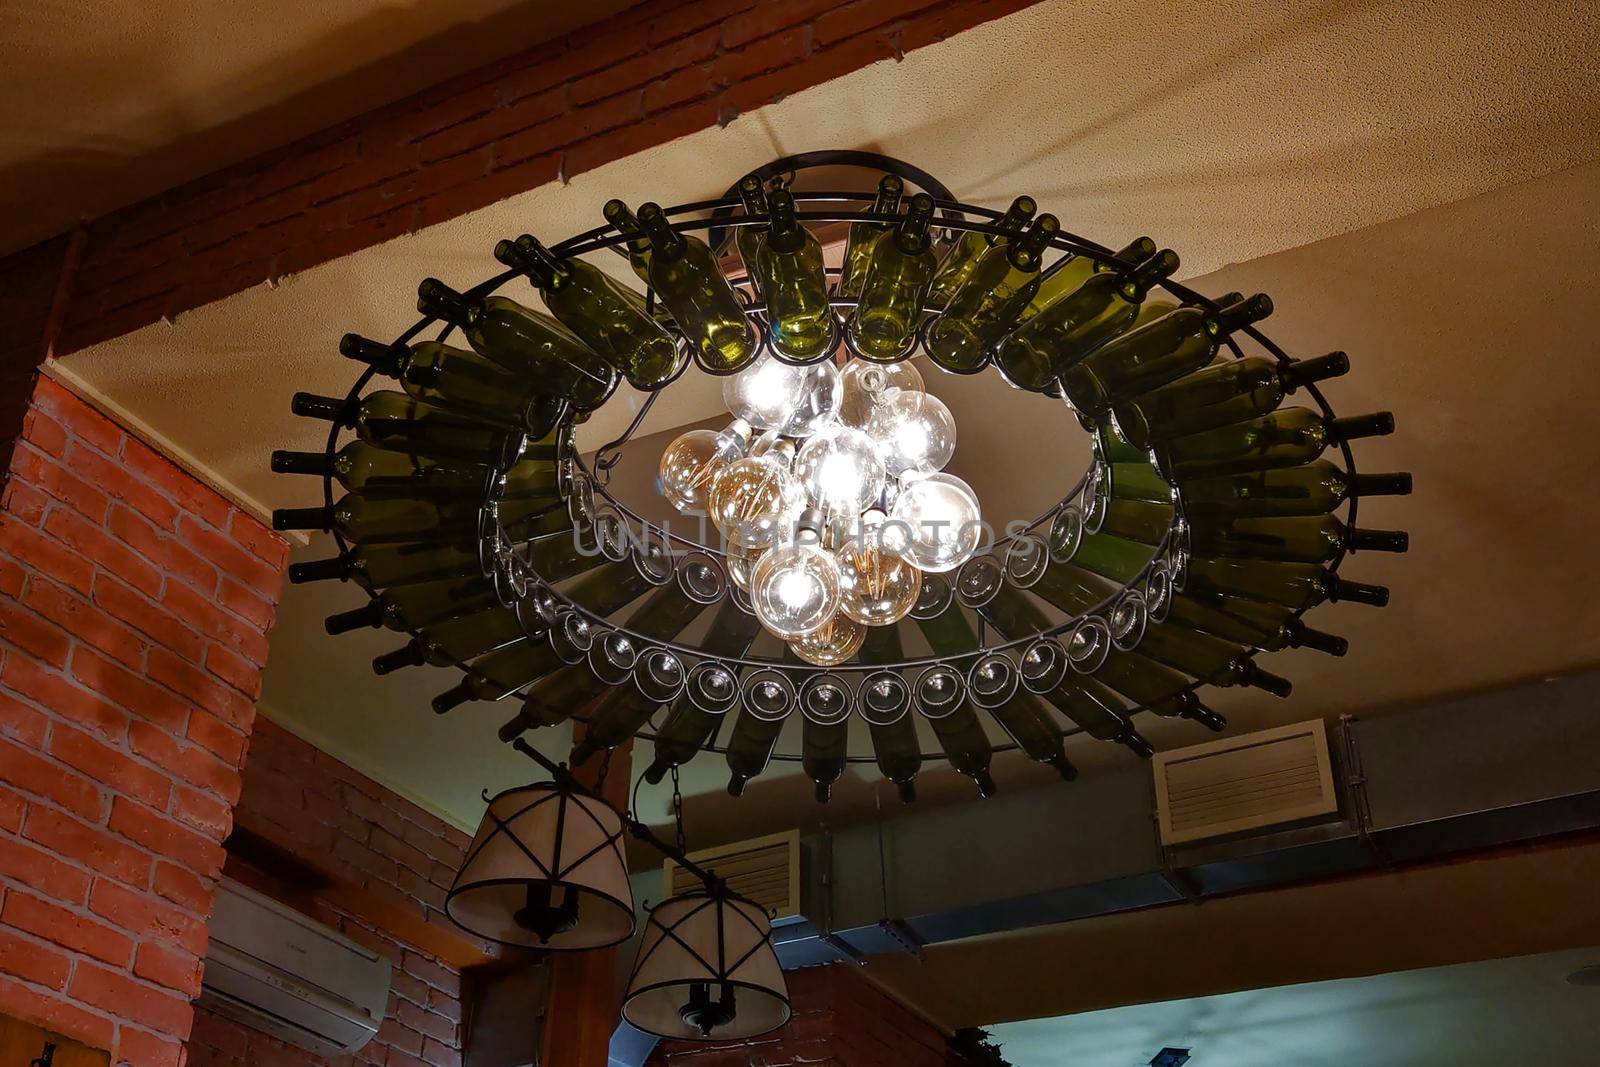 Beautifully decorated bottle chandelier in a bar or restaurant